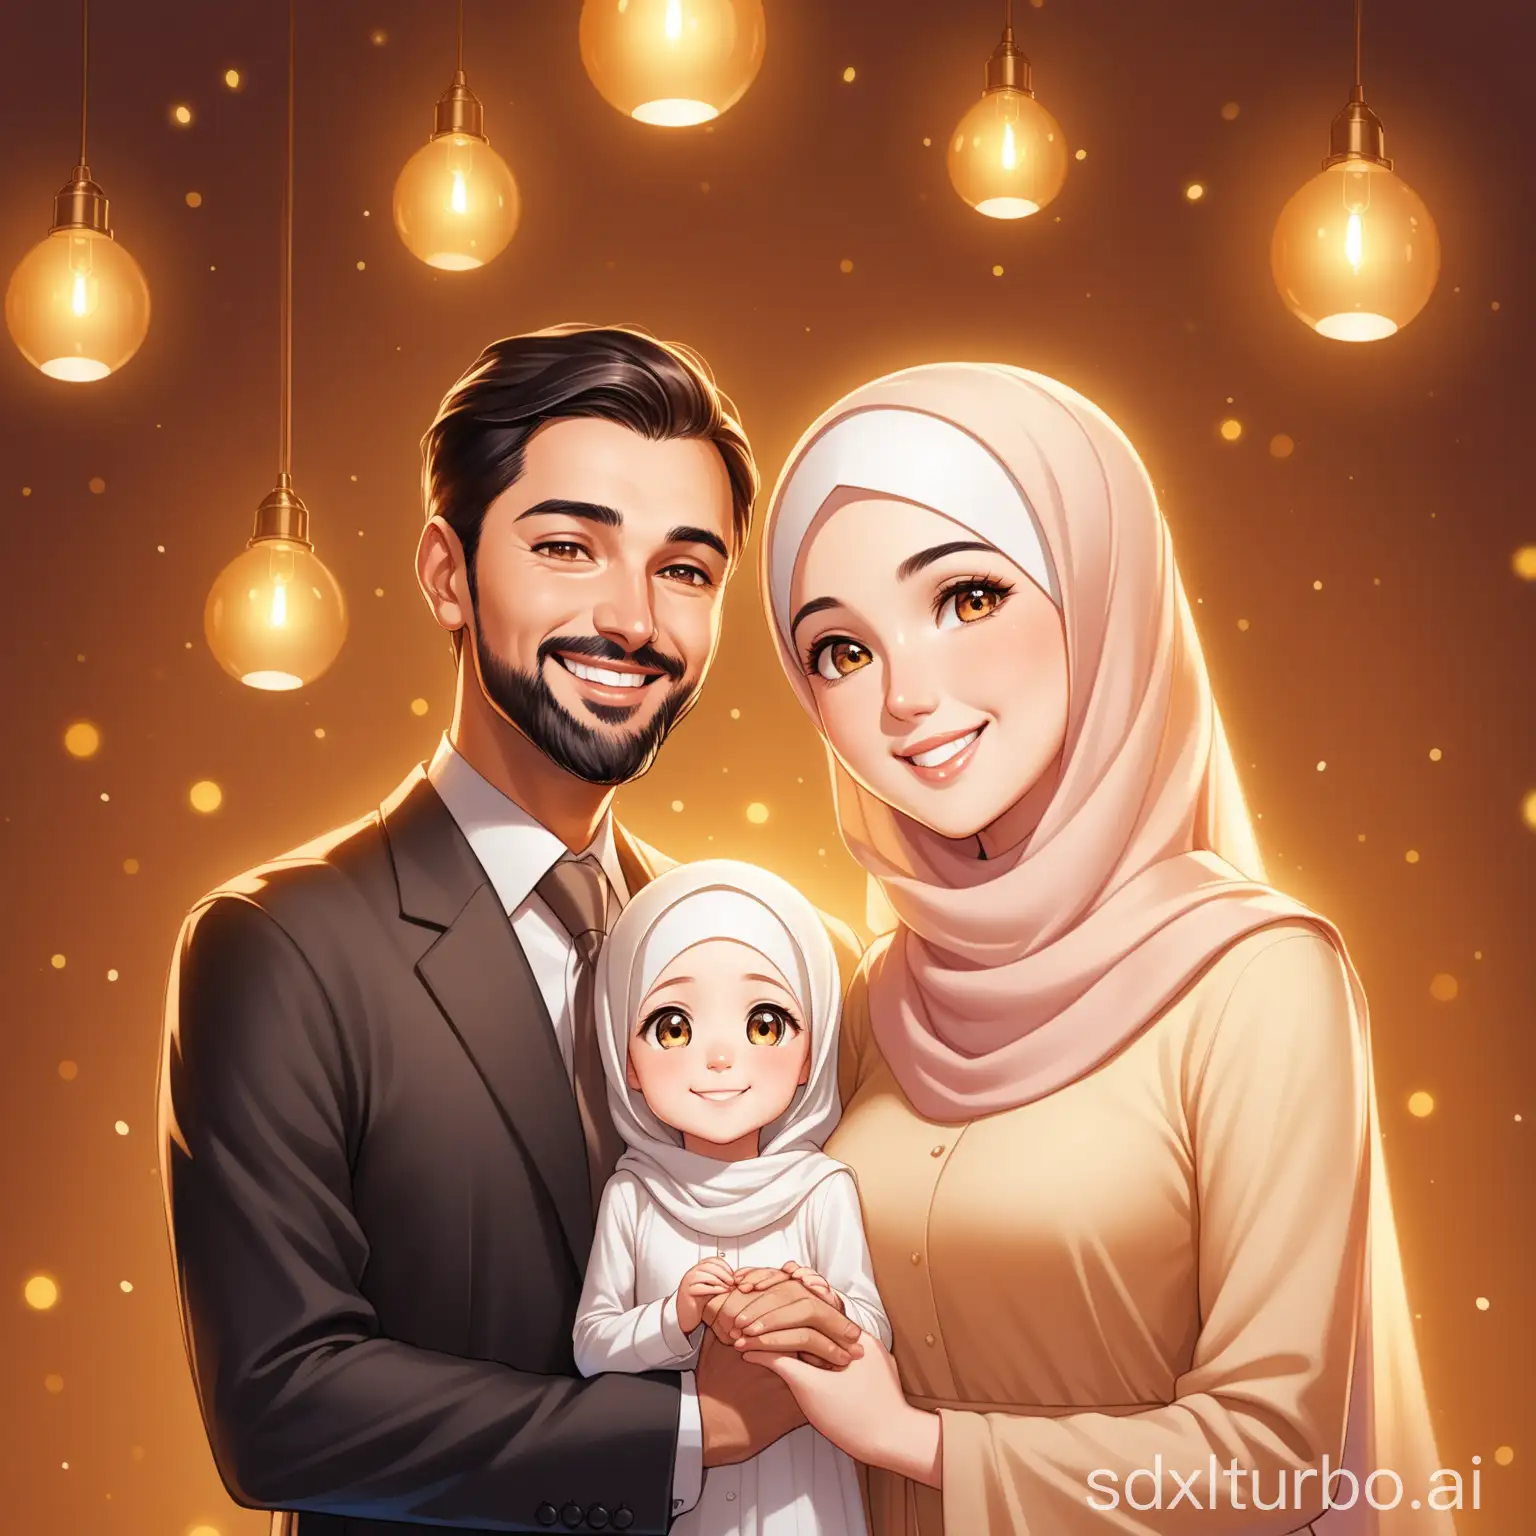 A captivating 4D caricature of an elegant and happy family of 3, consisting of a man, a woman, and their daughter. The man, a good-looking 30-year-old, hair parted on the right, stands tall with a confident smile. The woman, a 20-year-old wearing a hijab, gazes lovingly at her family, her eyes shining with warmth. Their 14-year-old daughter, also wearing a hijab, grasps their hands, her face beaming with joy. The atmosphere is filled with romance and love, highlighted by soft lighting and a warm color palette, capturing a heartwarming moment between the couple and their children.